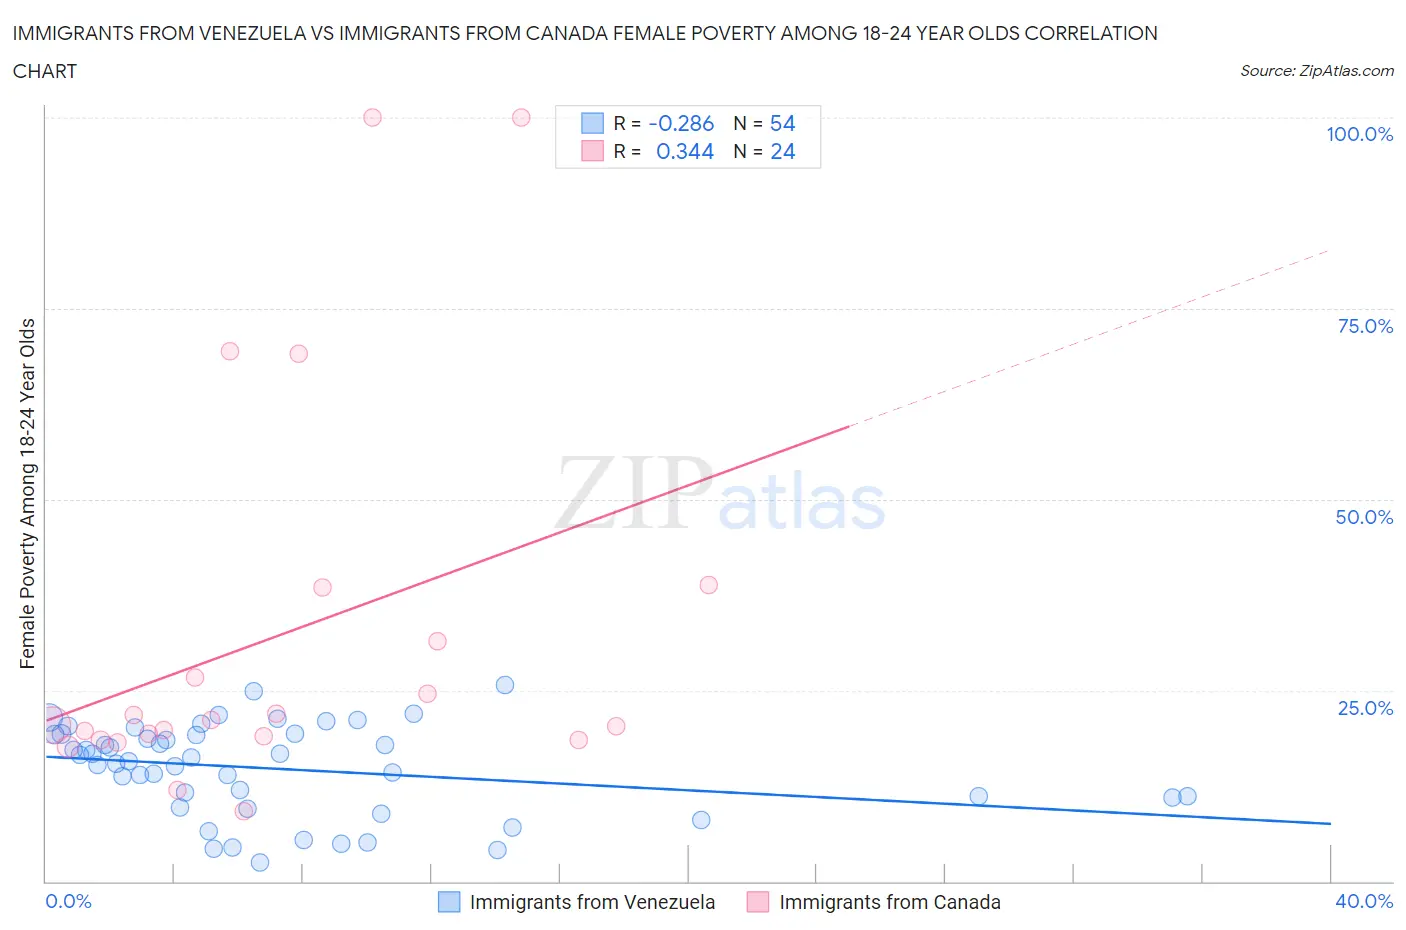 Immigrants from Venezuela vs Immigrants from Canada Female Poverty Among 18-24 Year Olds